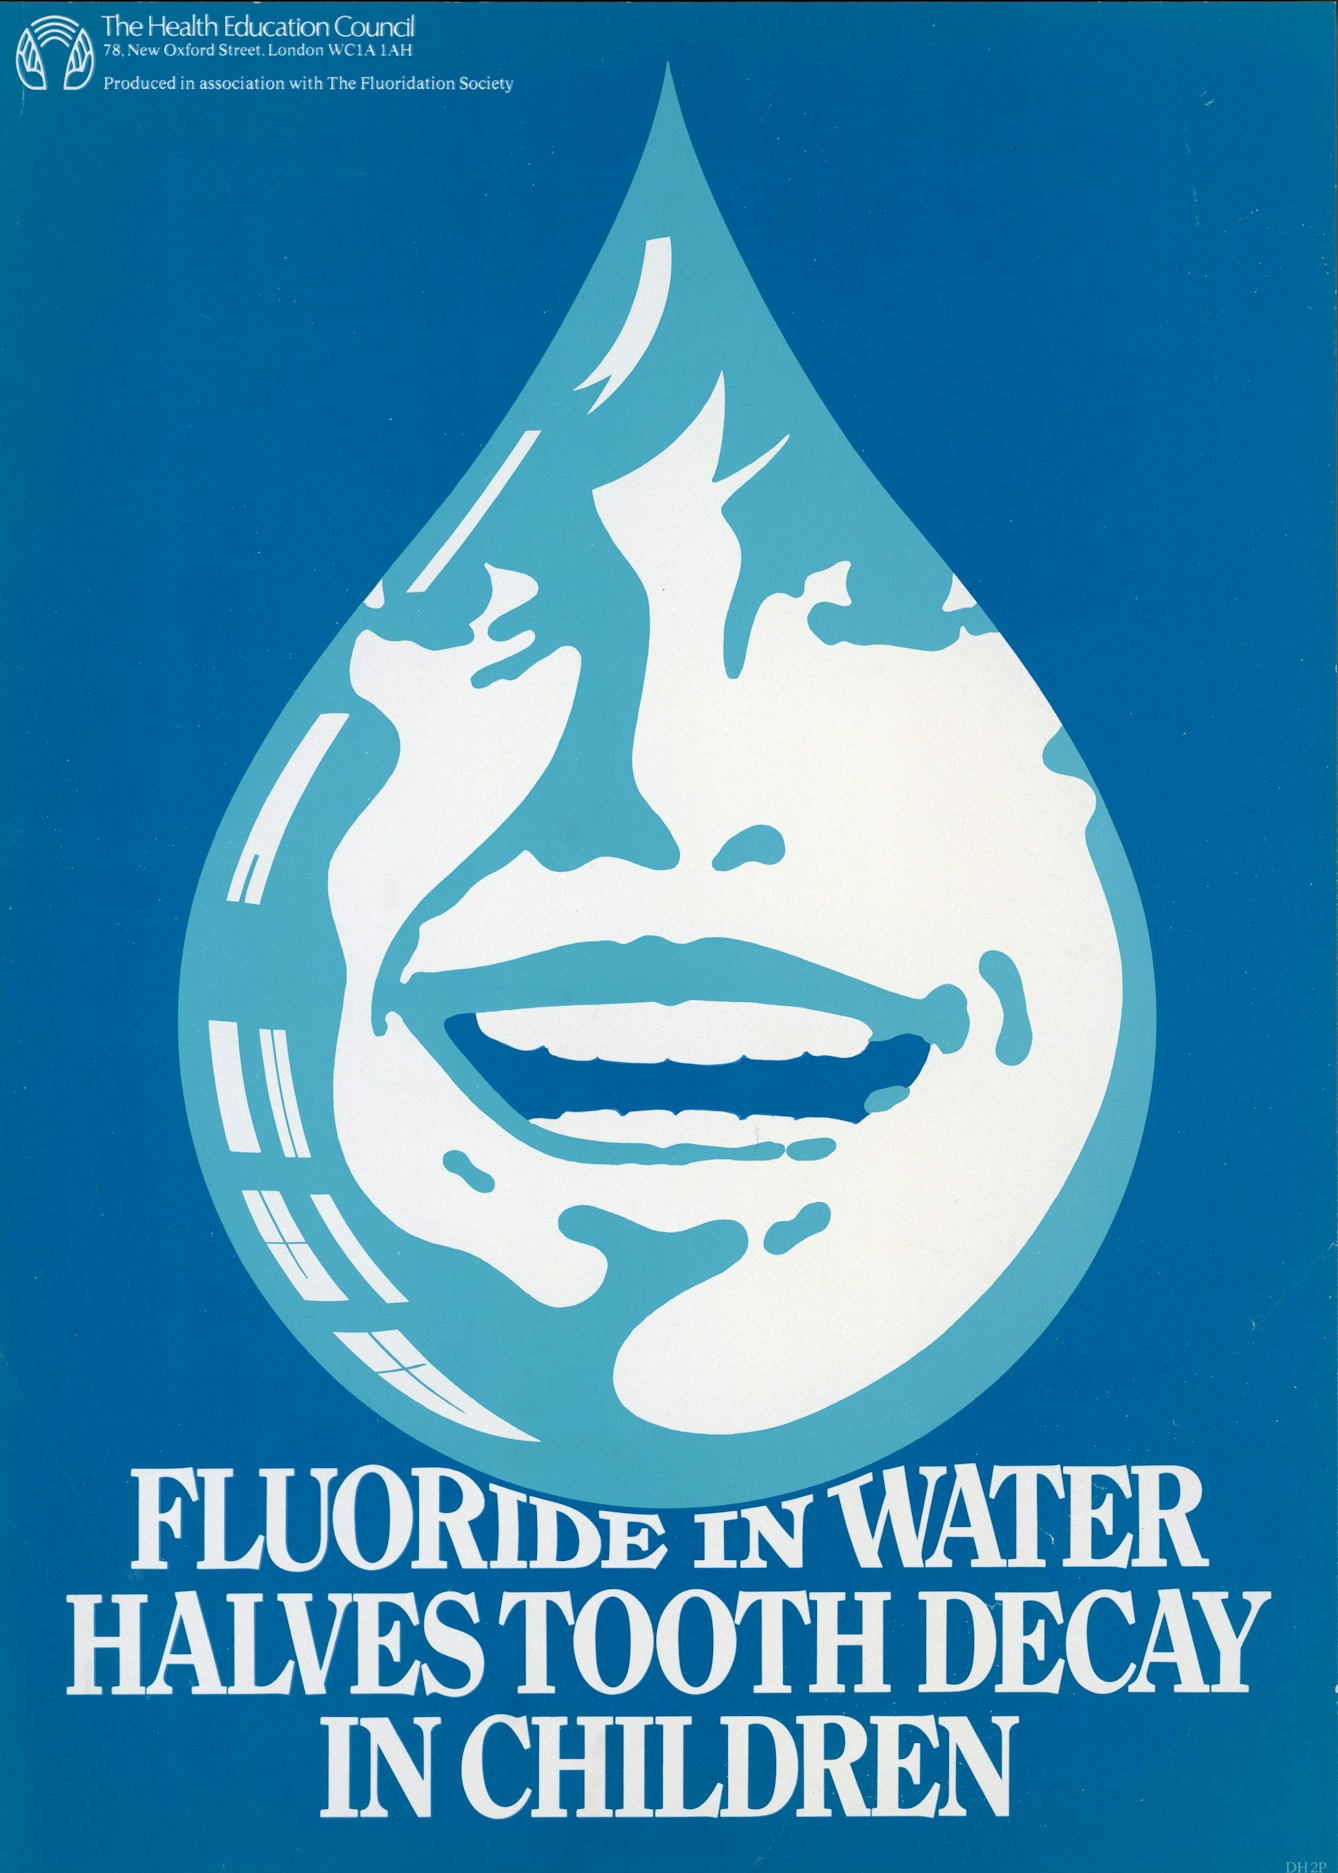 Poster showing a stylised child's face in a droplet of water. Text reads "Fluoride in water halves tooth decay in children".